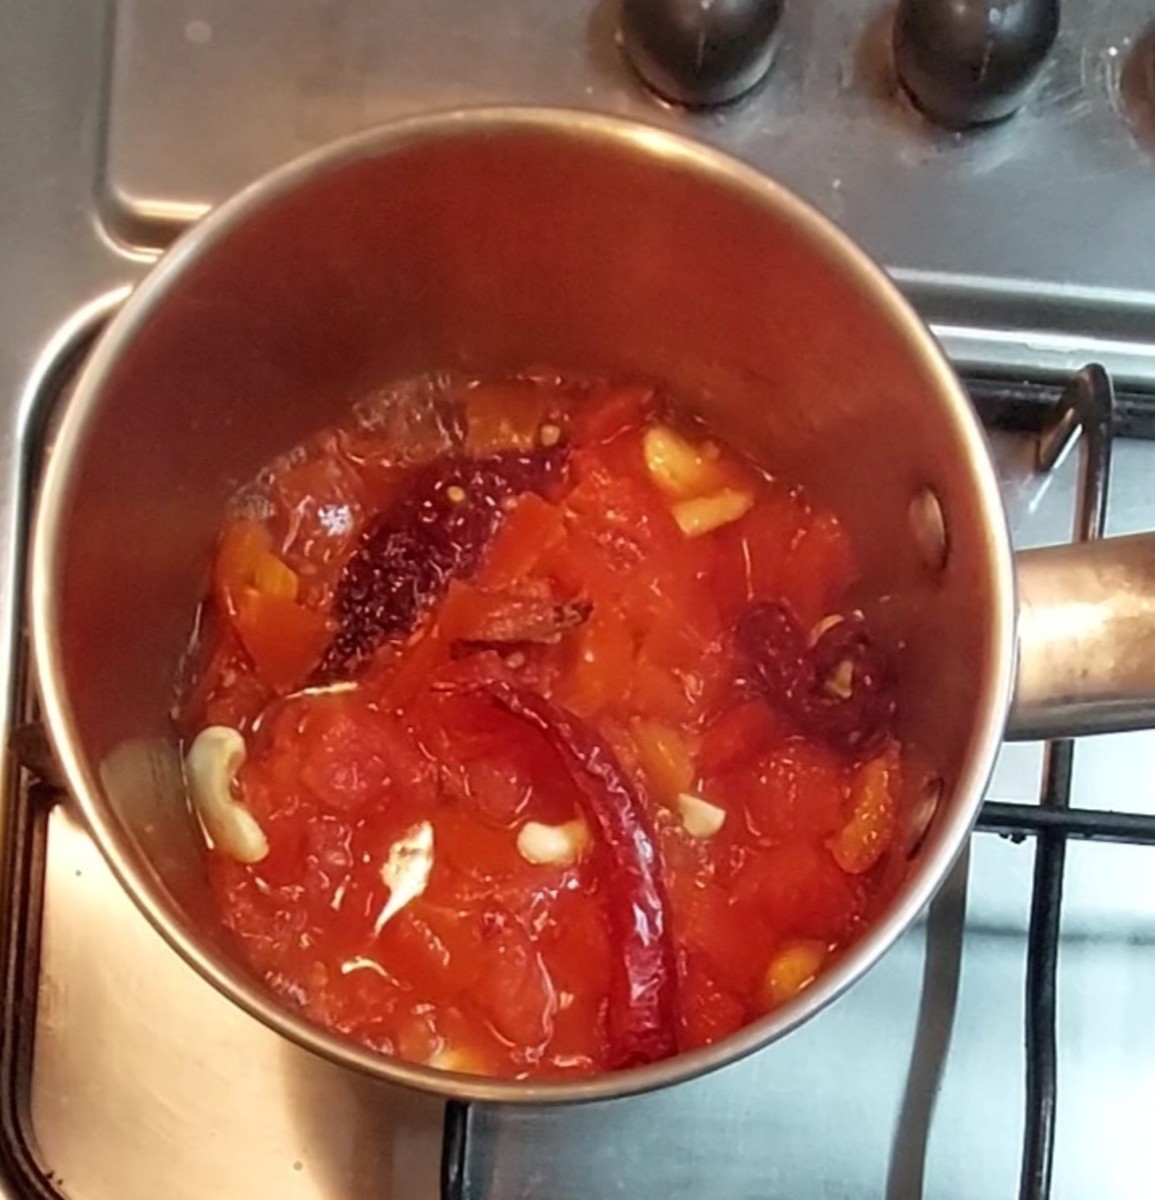 Close the lid and cook for 5 minutes or till tomatoes are well cooked. Switch off the flame and let it cool down to warm.